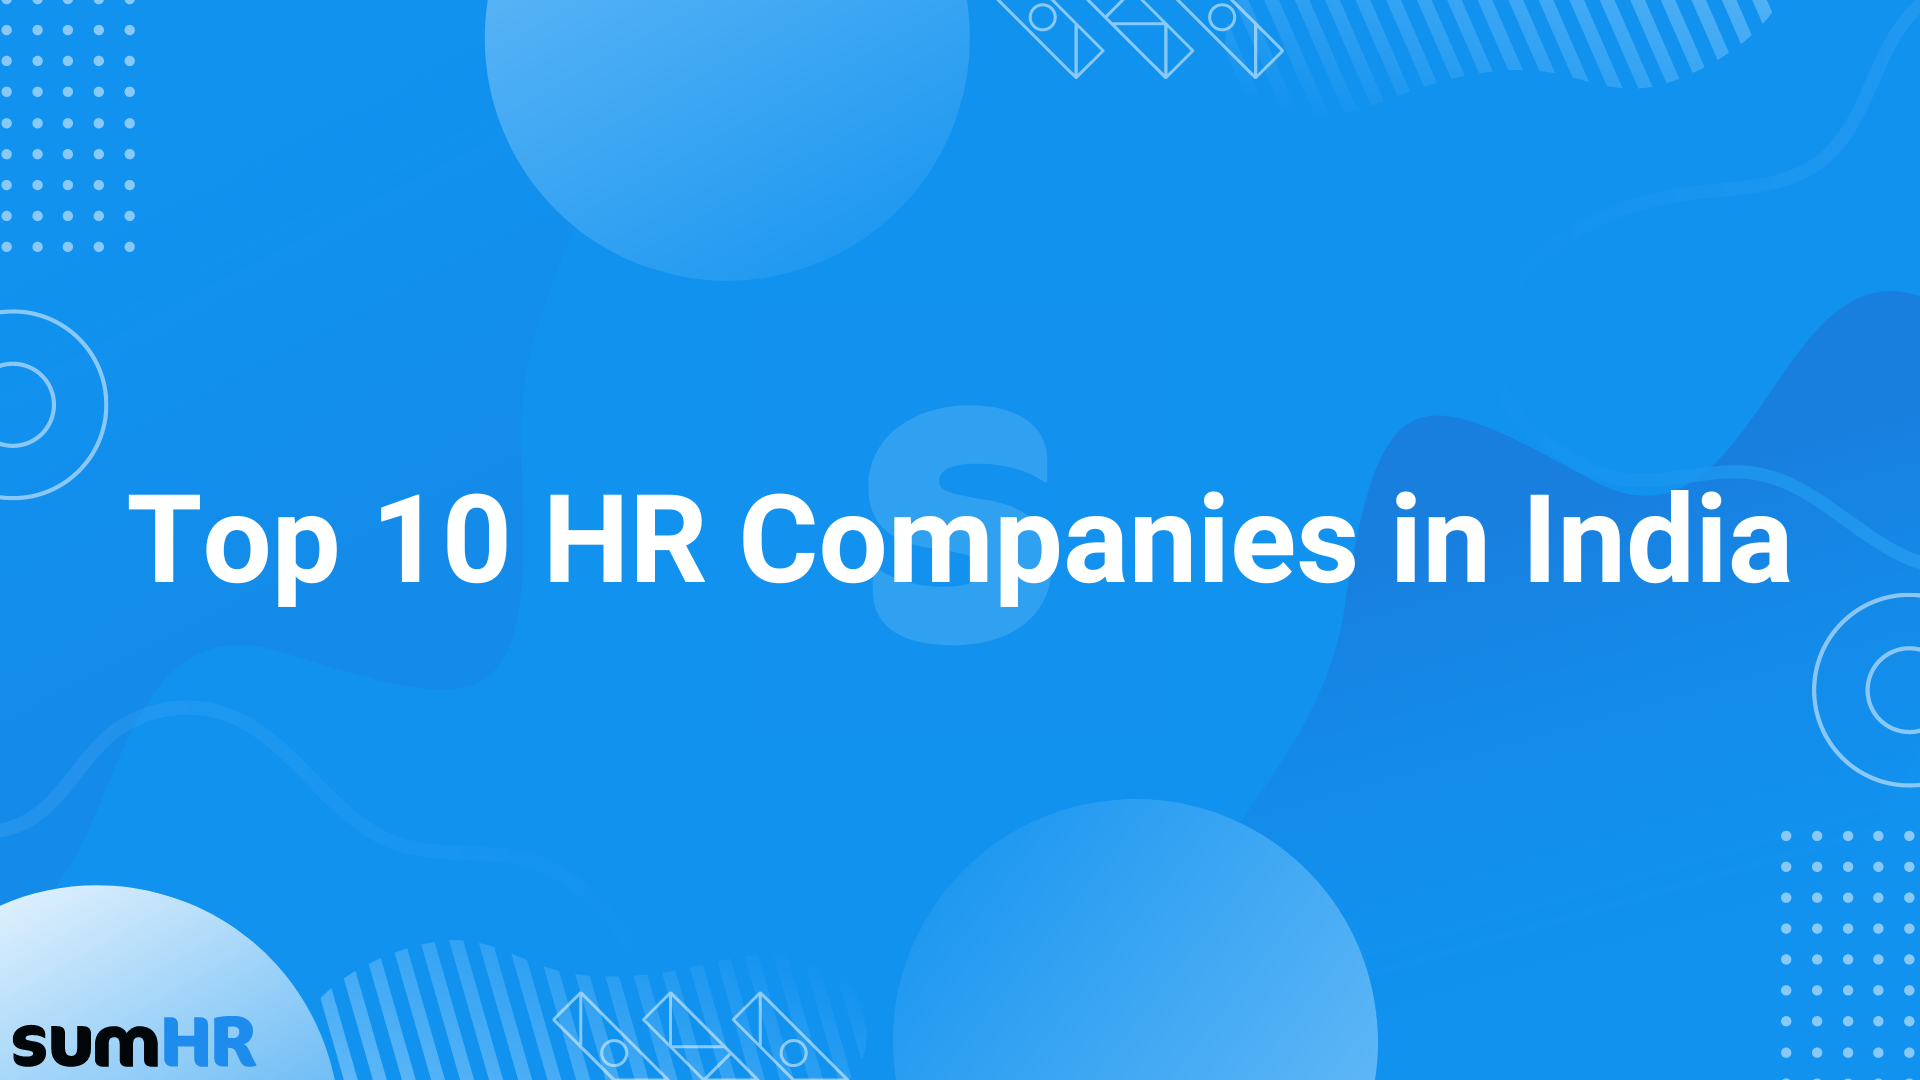 A feature image for top 10 HR companies in India